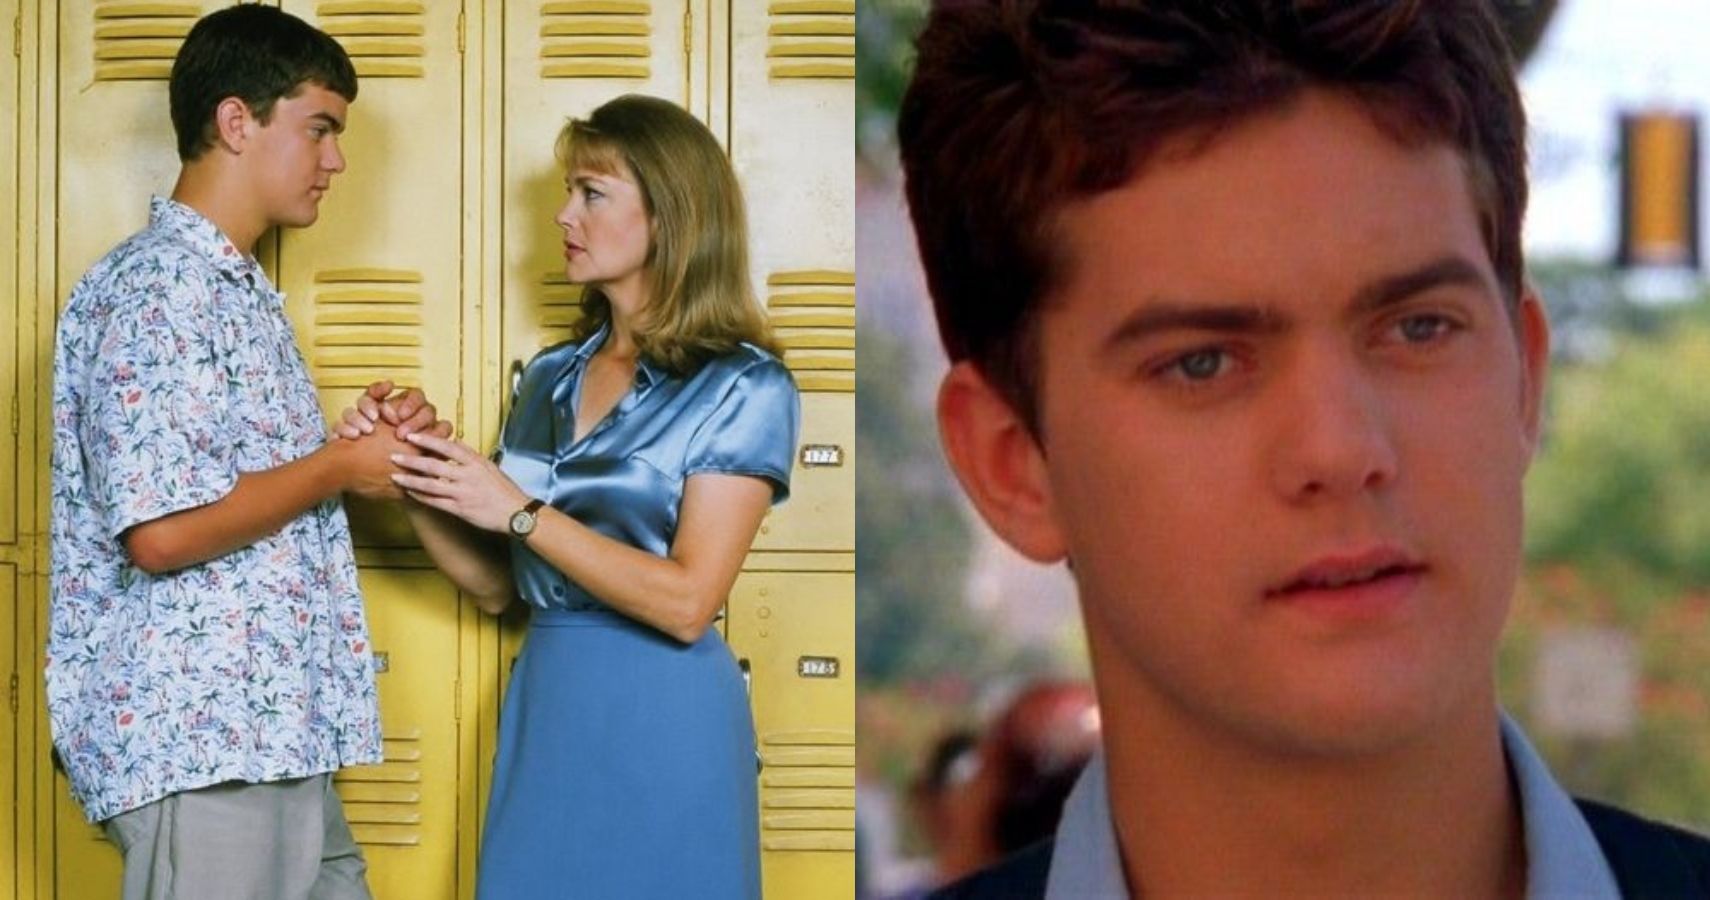 Dawson S Creek 10 Things About Pacey That Would Never Fly Today